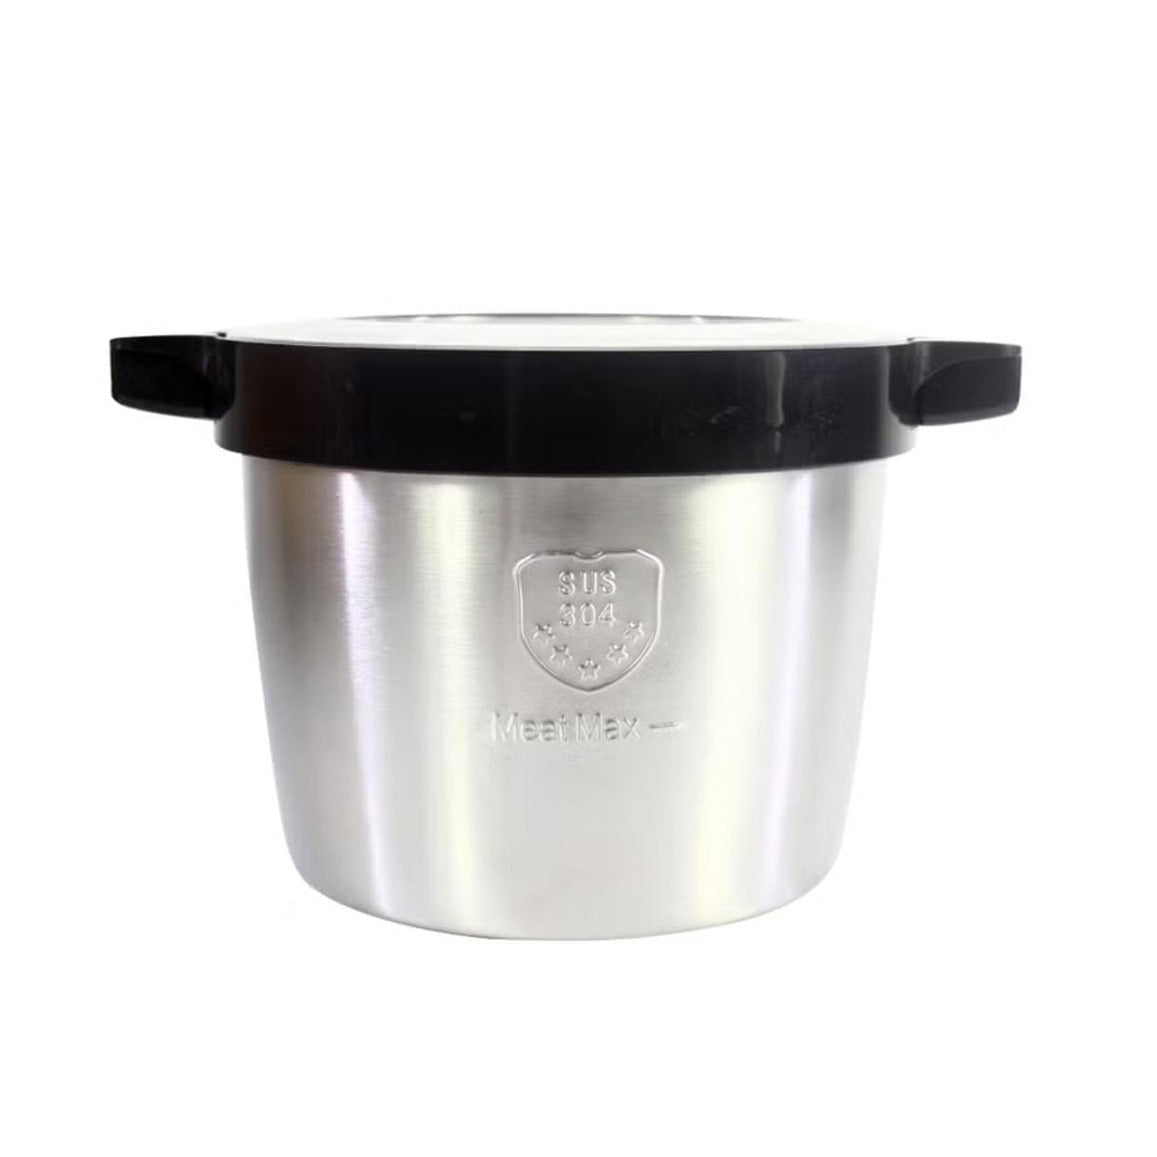 Container of JIHAM Stainless Steel Electric Chopper.